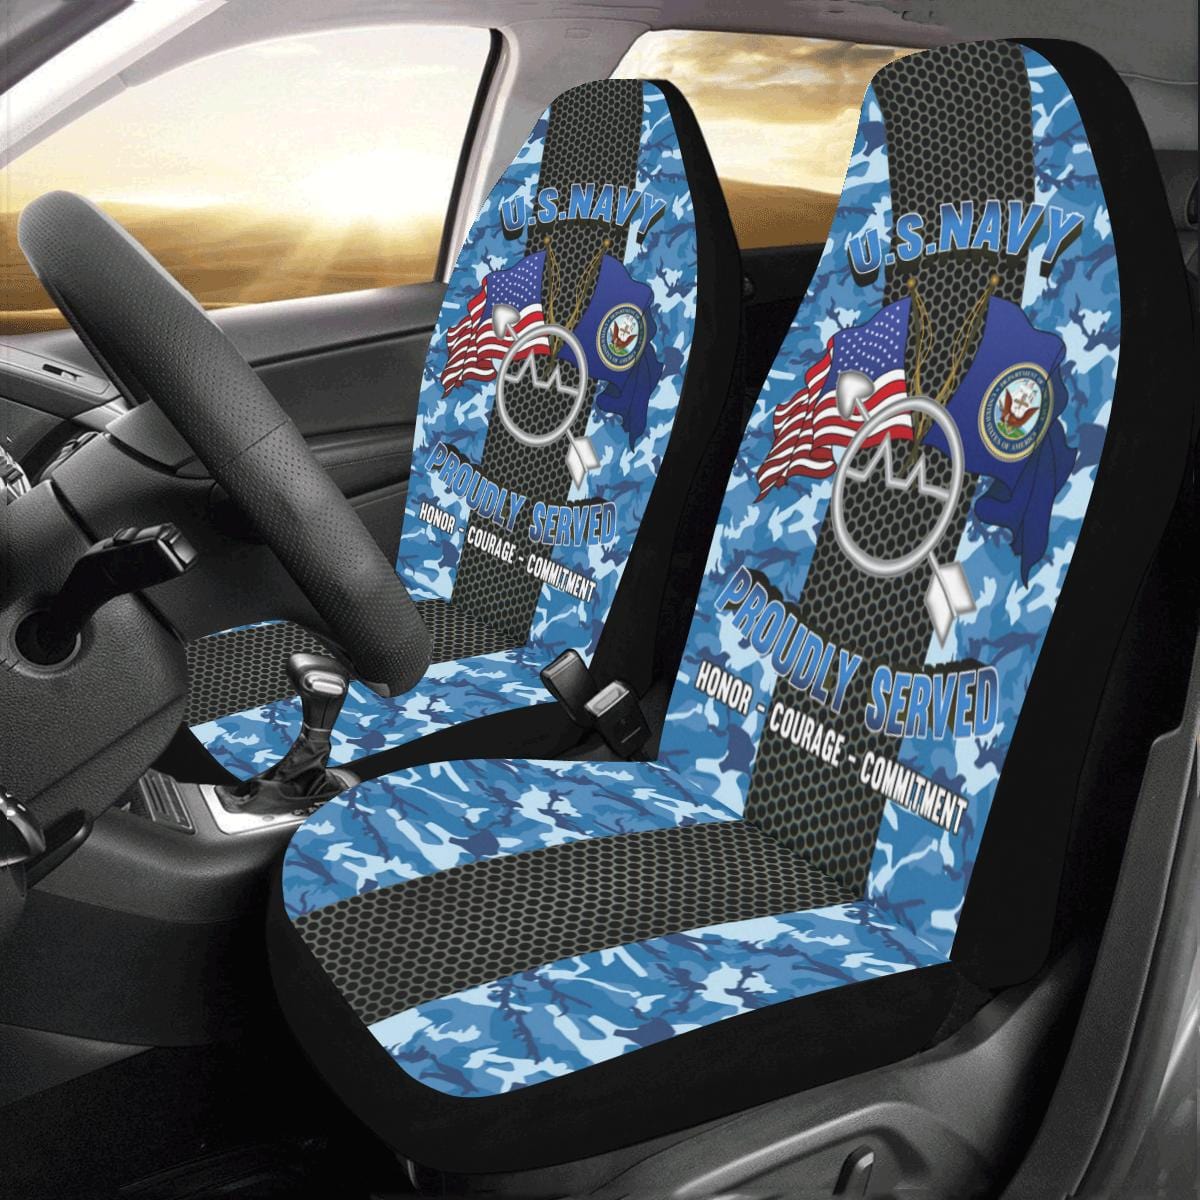 U.S Navy Operations specialist Navy OS Car Seat Covers (Set of 2)-SeatCovers-Navy-Rate-Veterans Nation